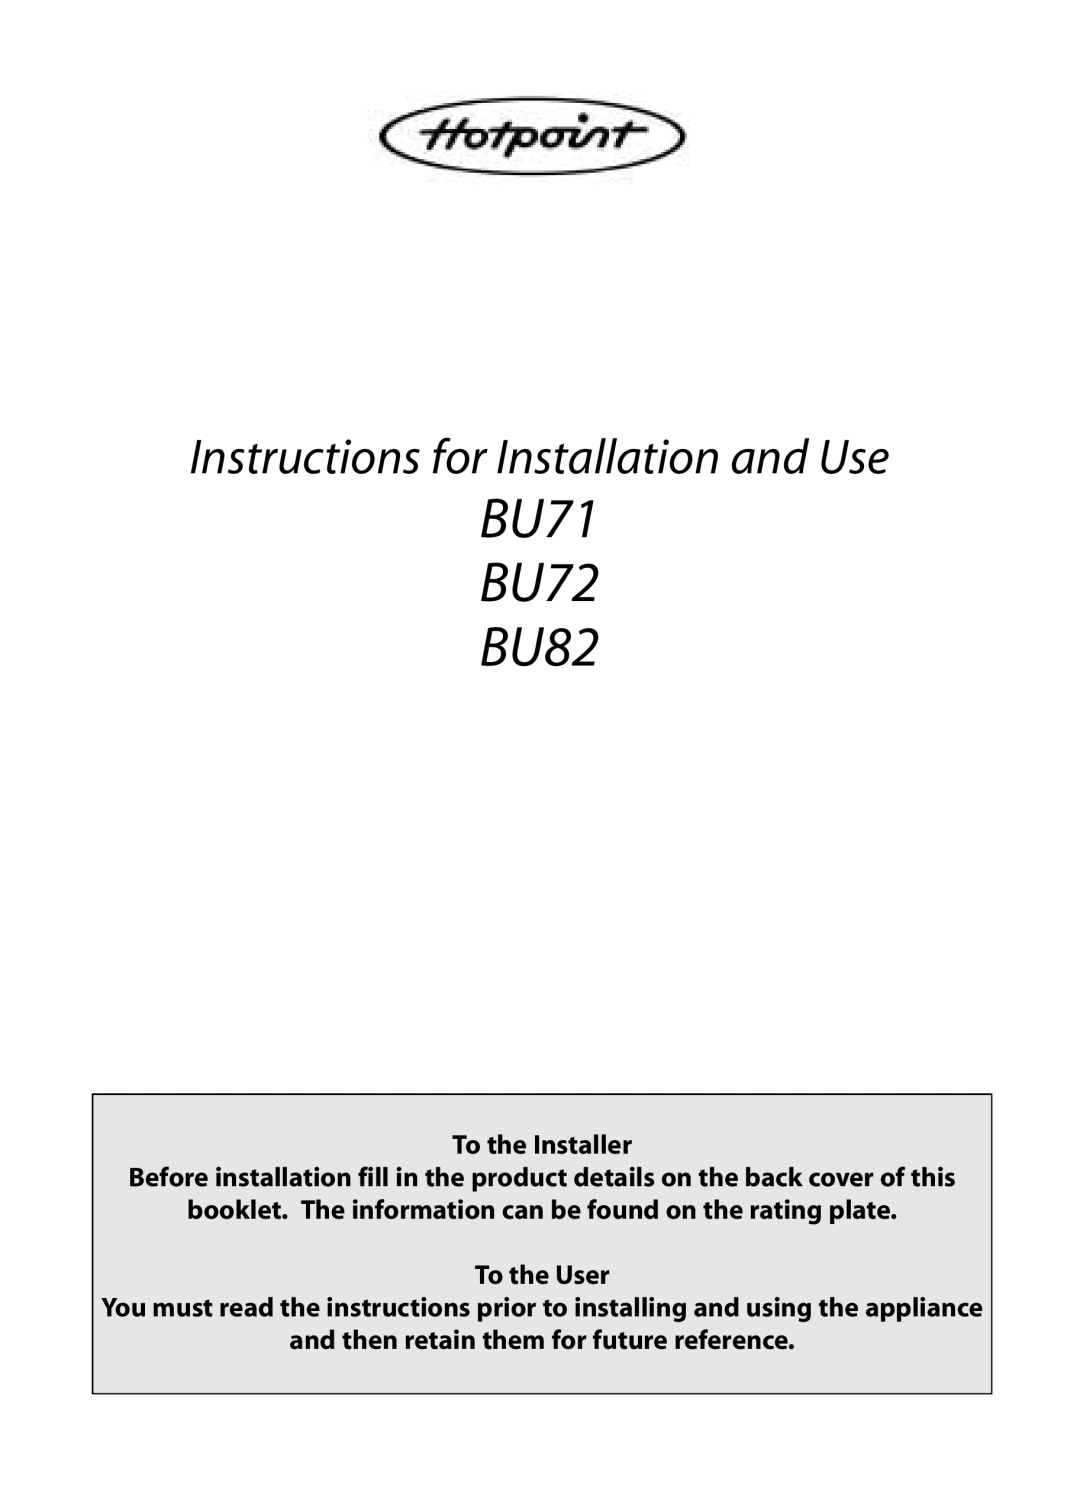 Hotpoint manual BU71 BU72 BU82, Instructions for Installation and Use, To the Installer 